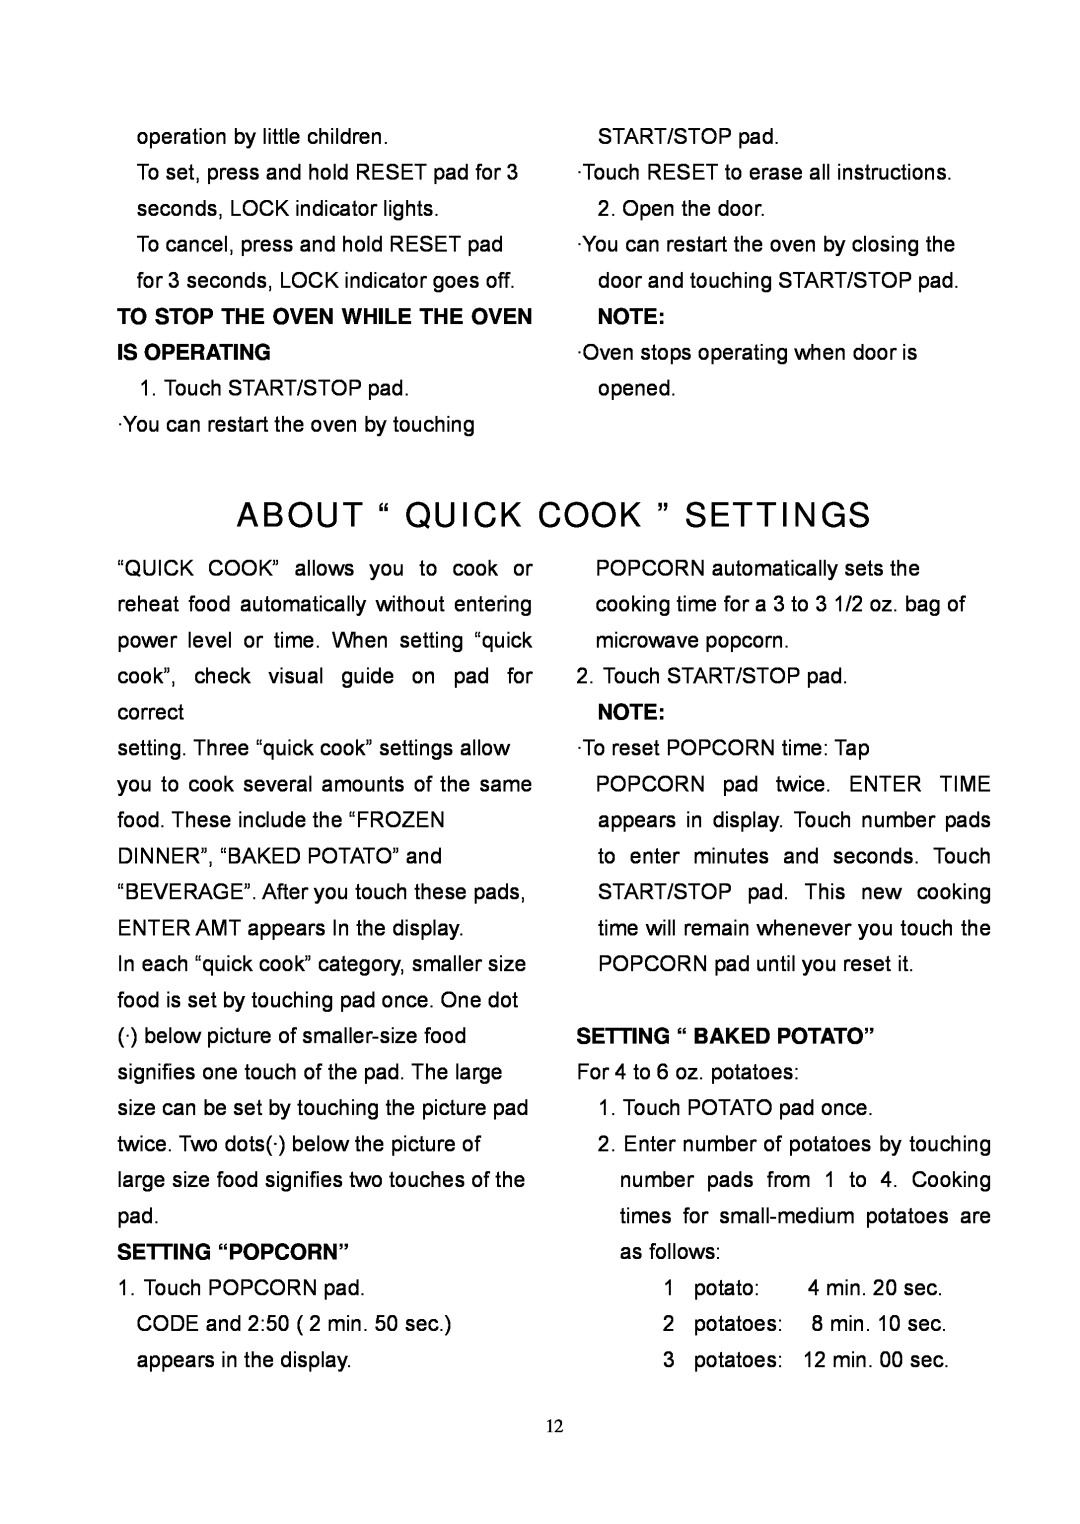 Tappan TM7050S owner manual About “ Quick Cook ” Settings, To Stop The Oven While The Oven Is Operating, Setting “Popcorn” 